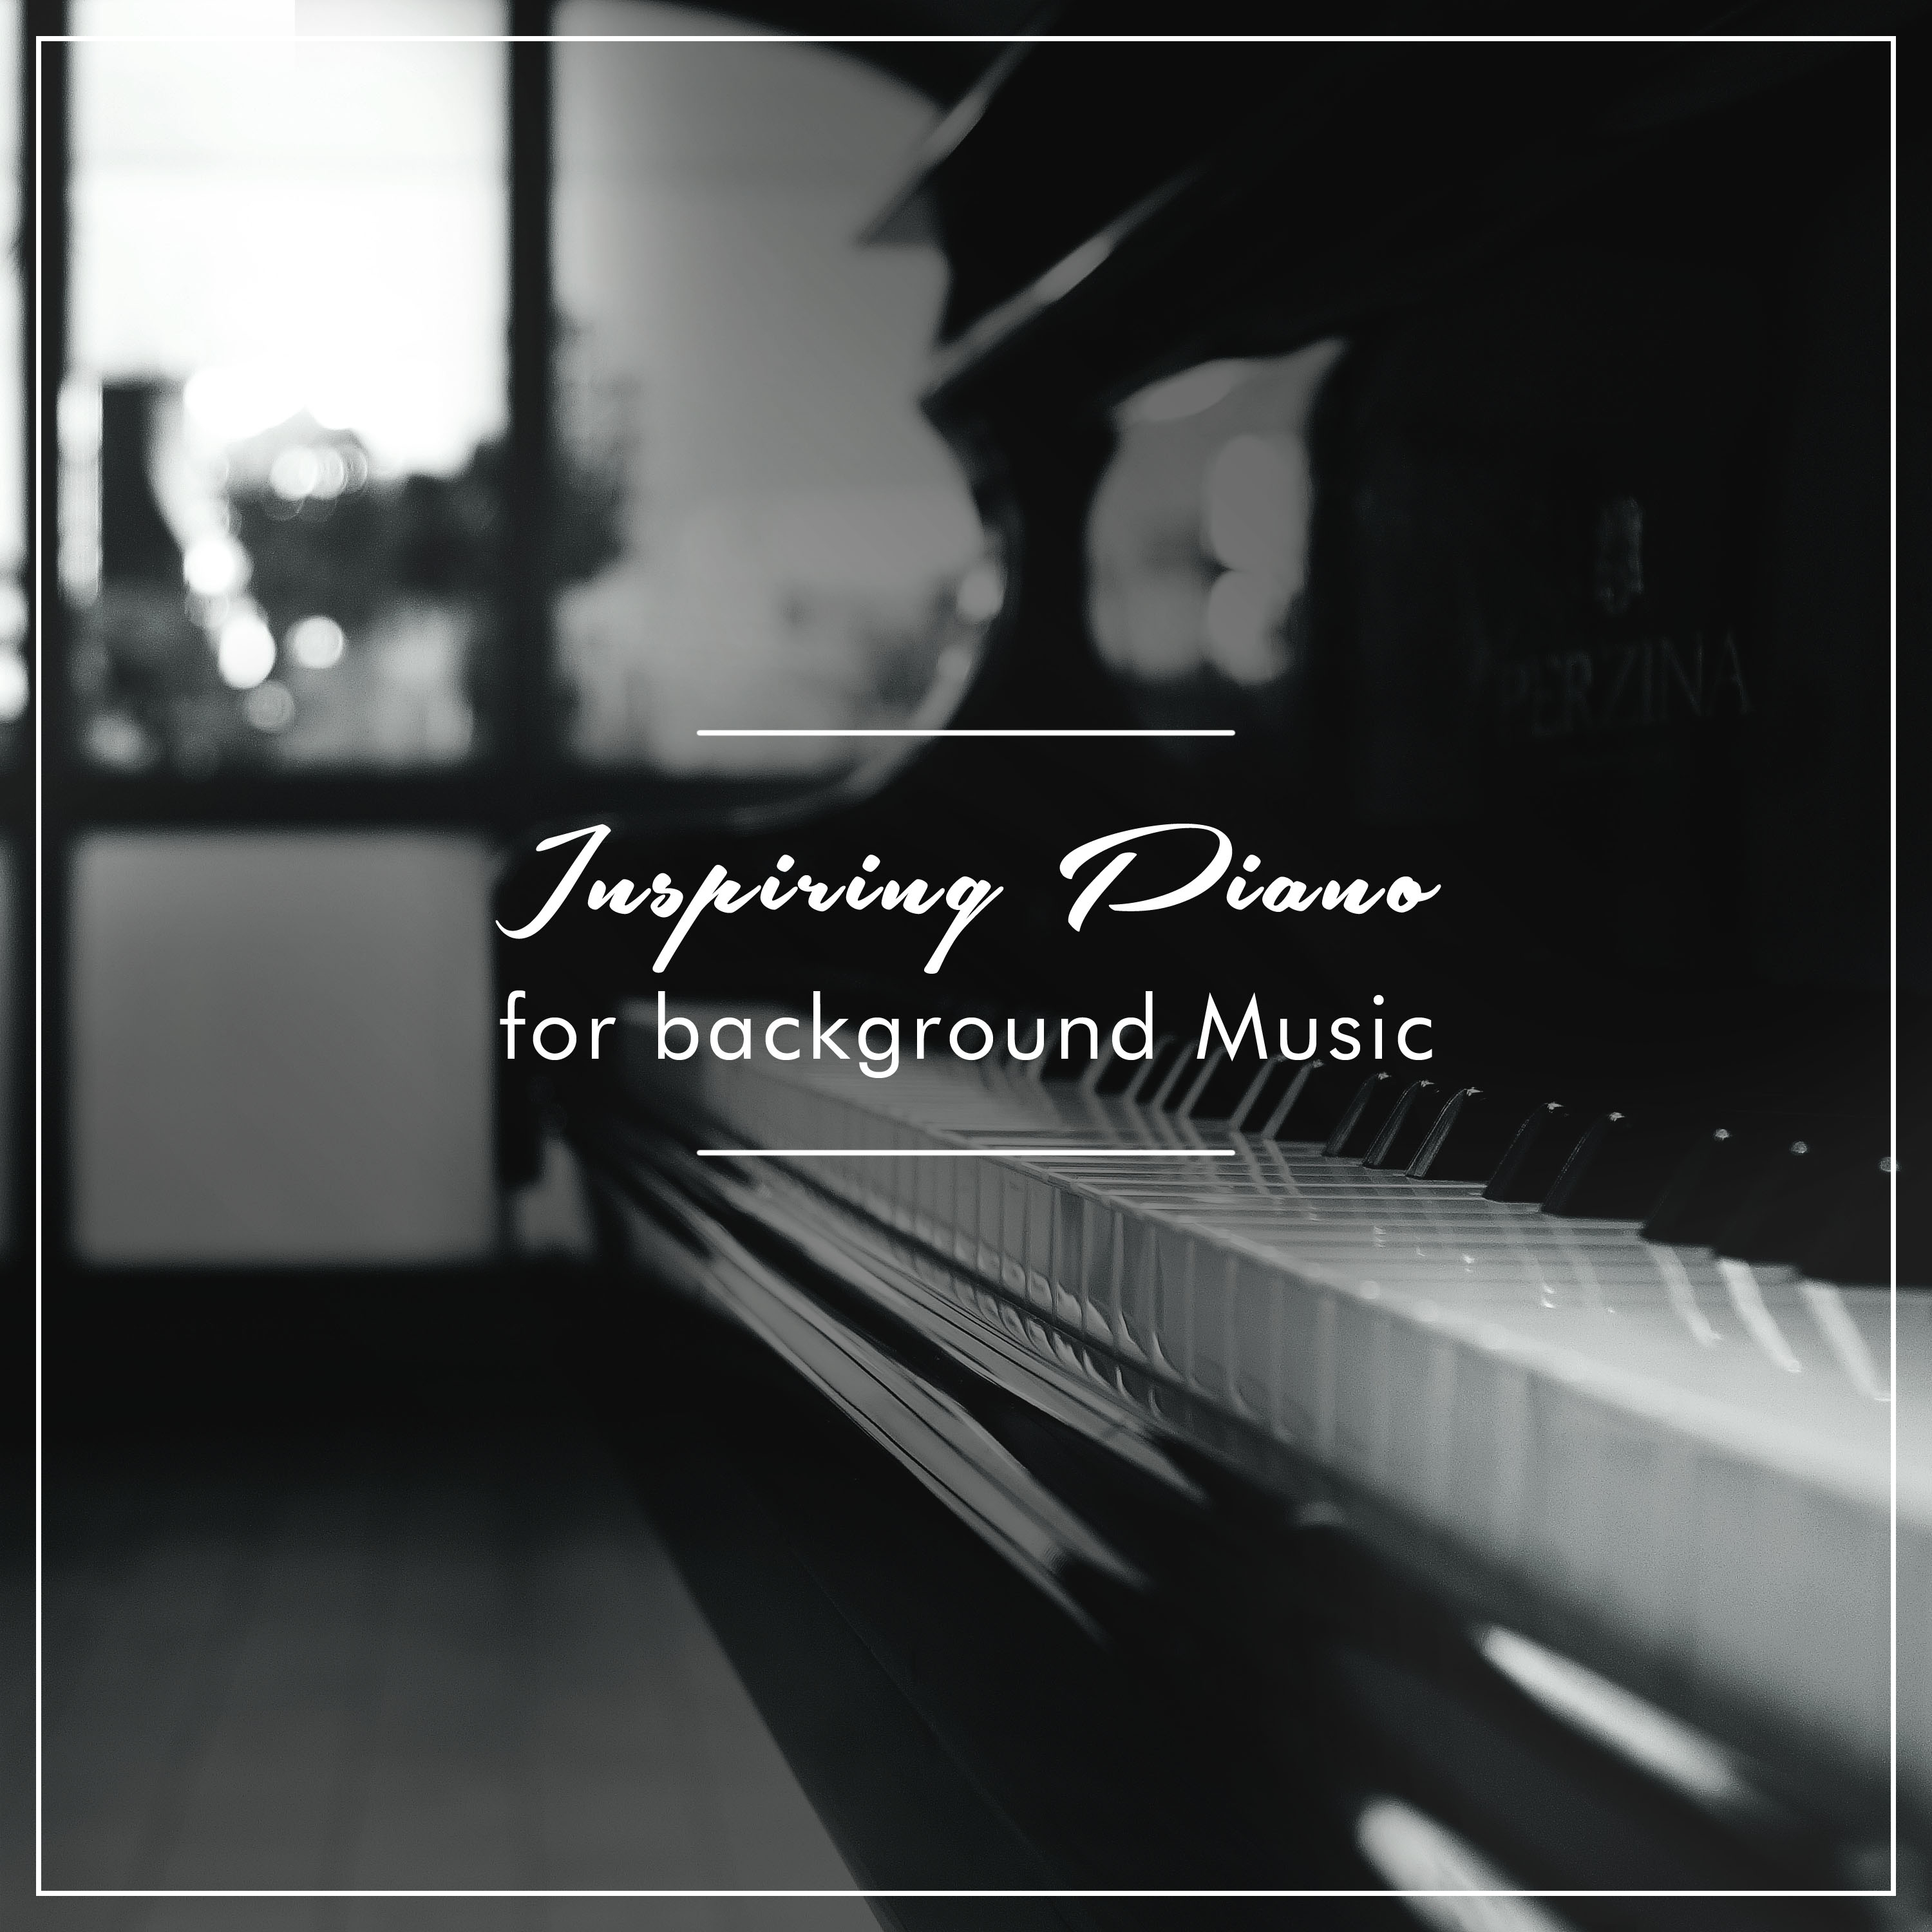 19 Inspiring Piano Pieces for Background Music